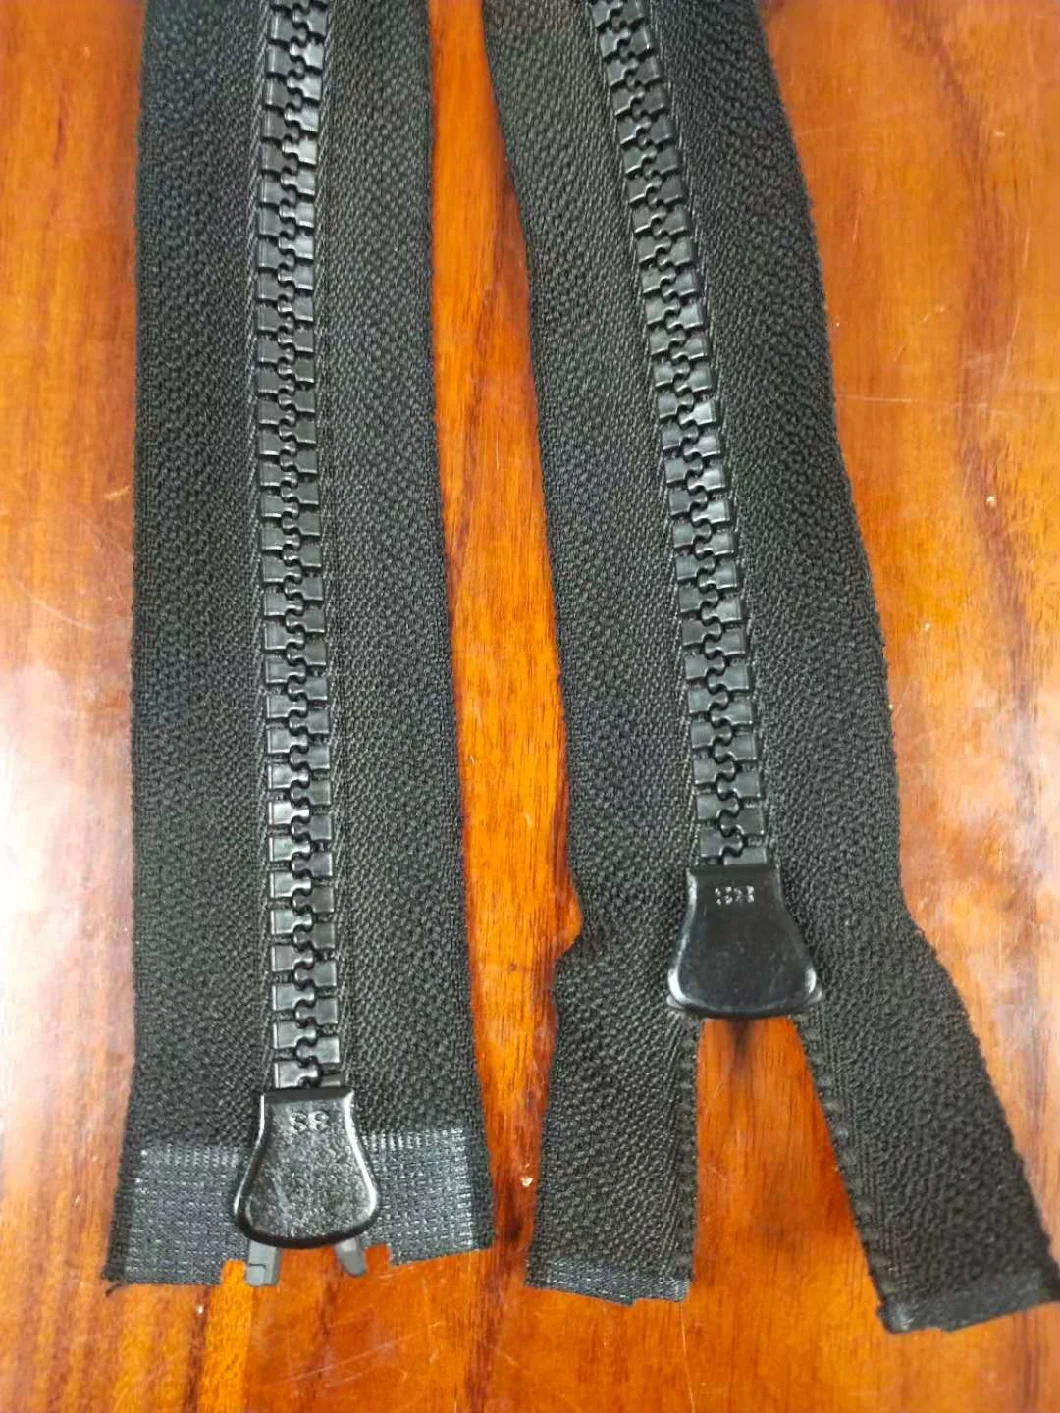 5# 60cm Fr Fireproof Zippers 50%Aramid and 50% Polyester